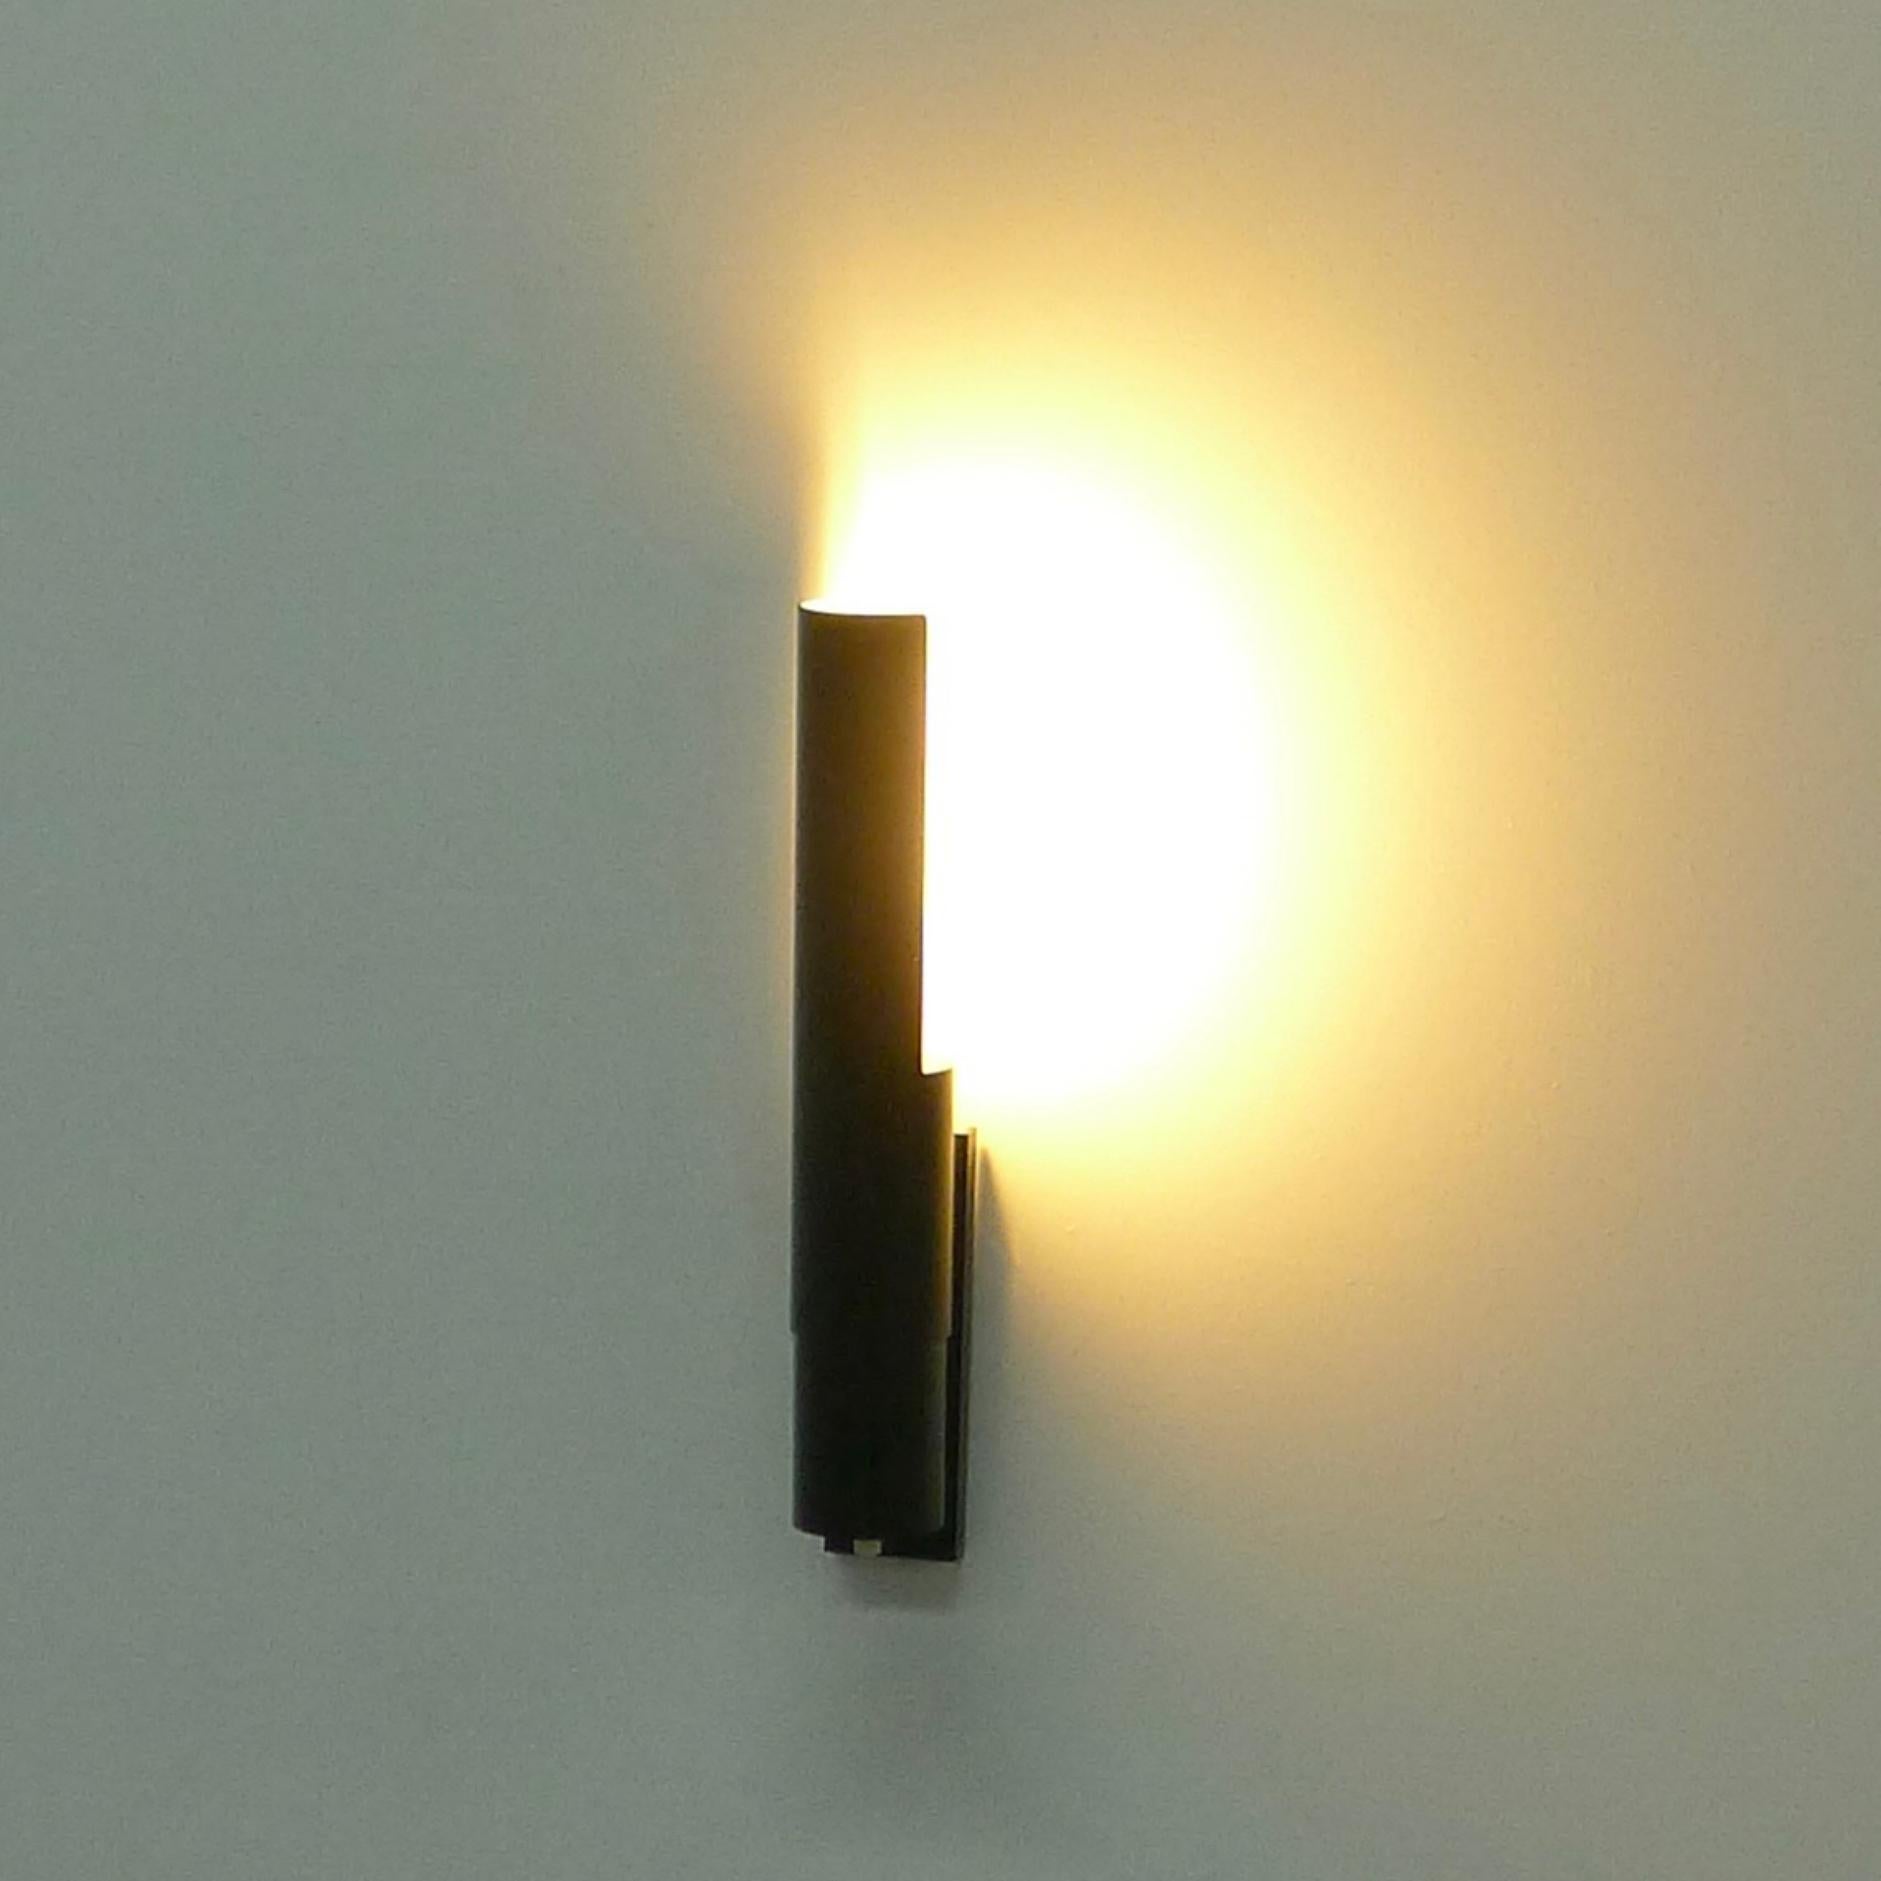 Mid-20th Century Gino Sarfatti, Wall Light, model 211, designed 1955, made by Arteluce 1950s For Sale